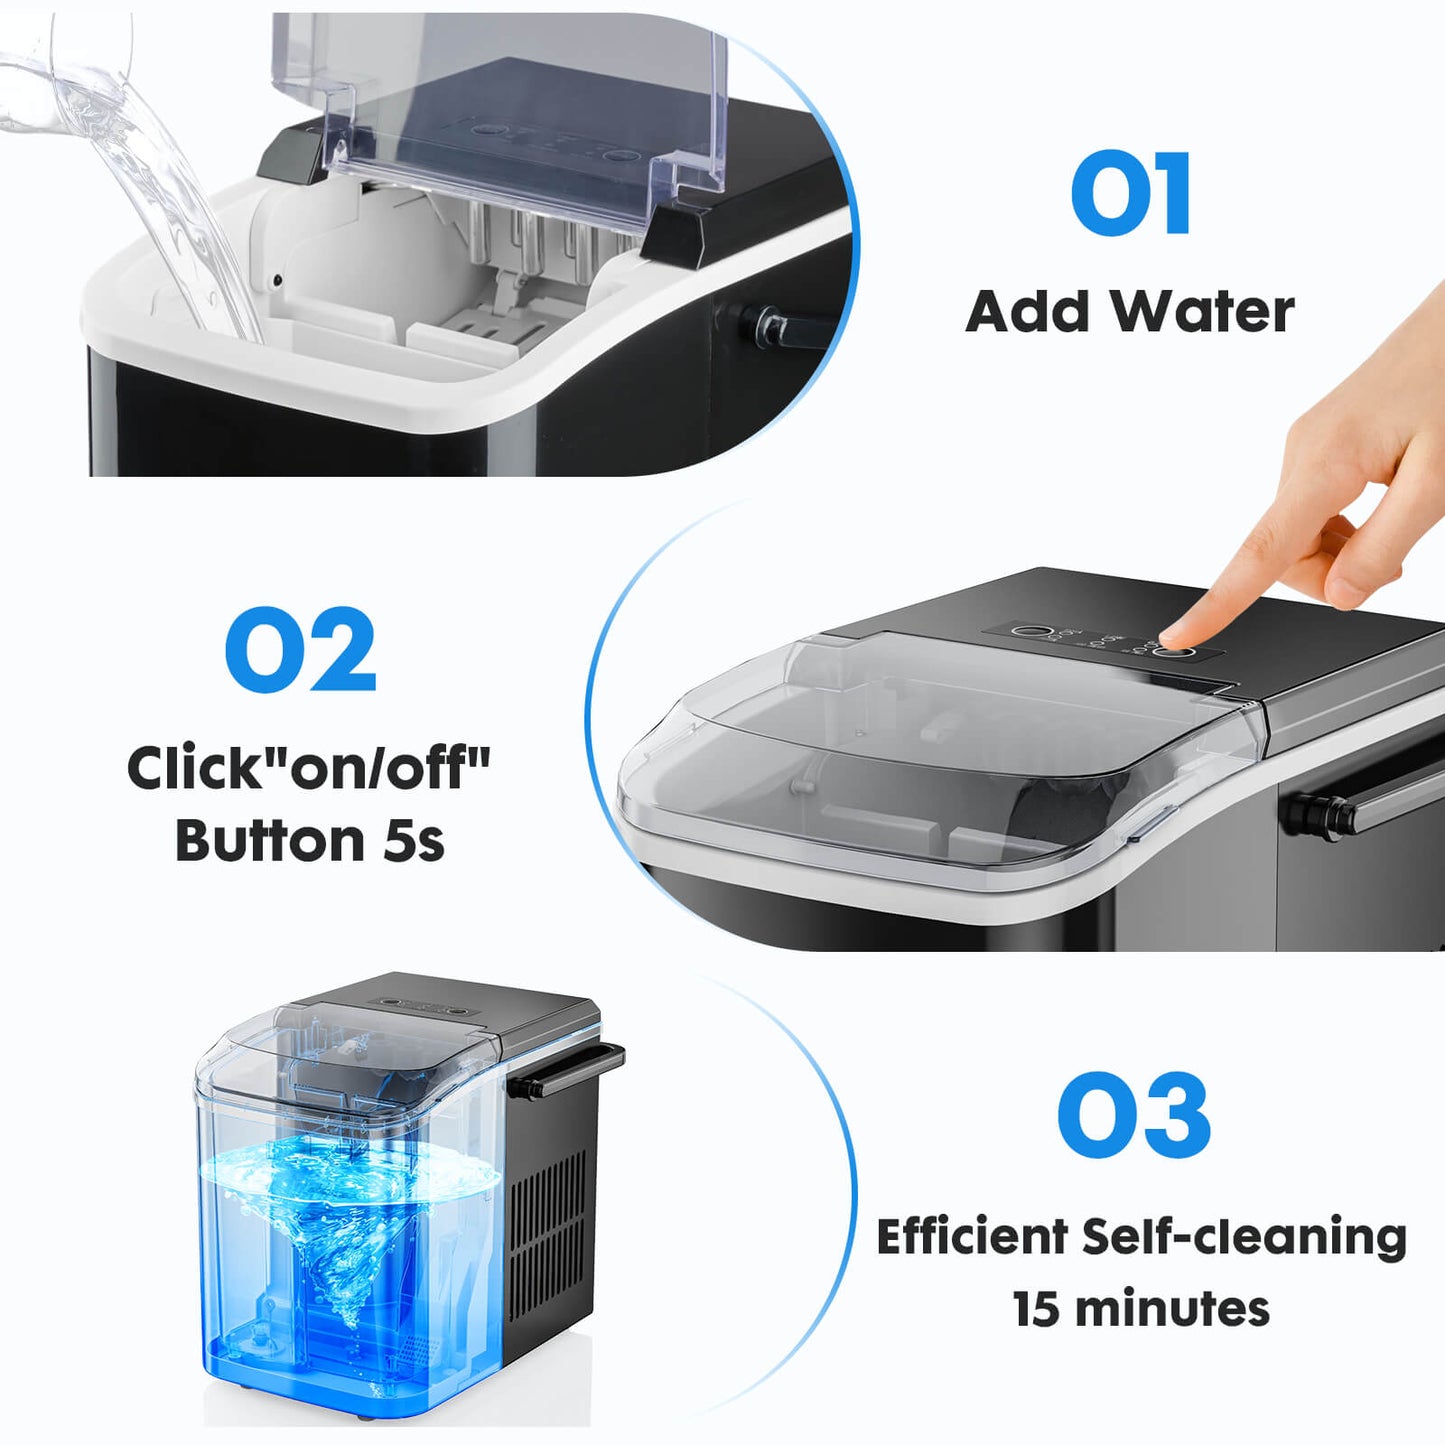 Countertop Ice Maker Machine, Portable Self-Cleaning With Basket and Handle